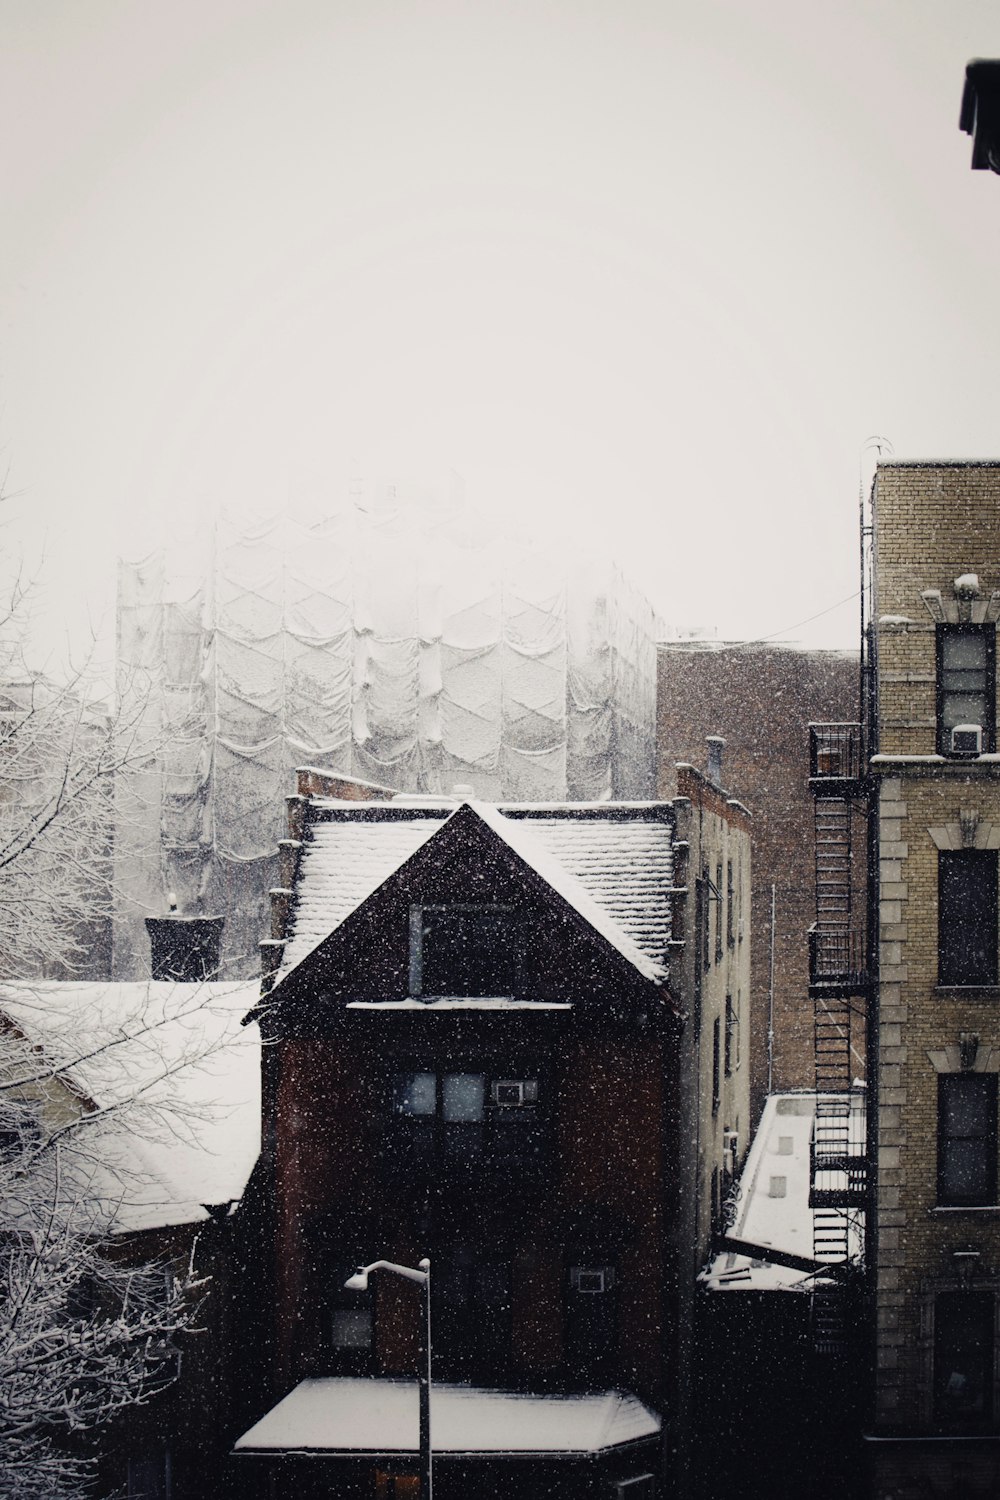 a snowy view of buildings and a street light